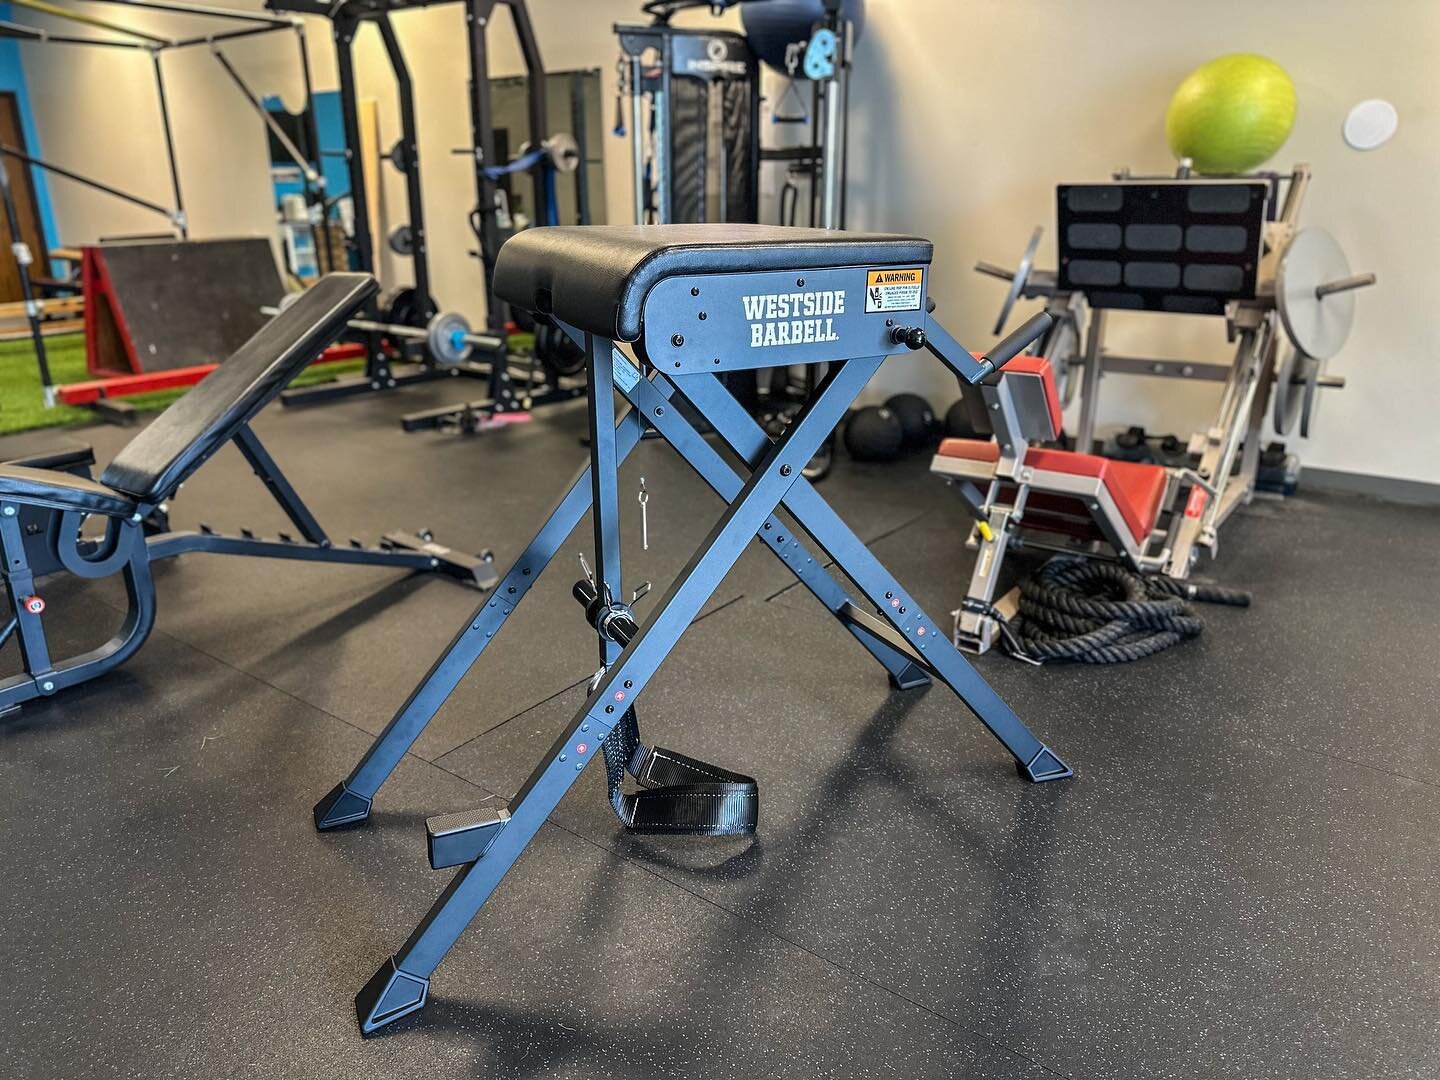 The new Reverse Hyper Extension machine from @westsidebarbellofficial and @roguefitness is all setup! This thing is awesome! Great build quality and it folds up when needed! 
🔻
#roguefitness #minimal #rogue #westsidebarbell #personaltrainer #persona